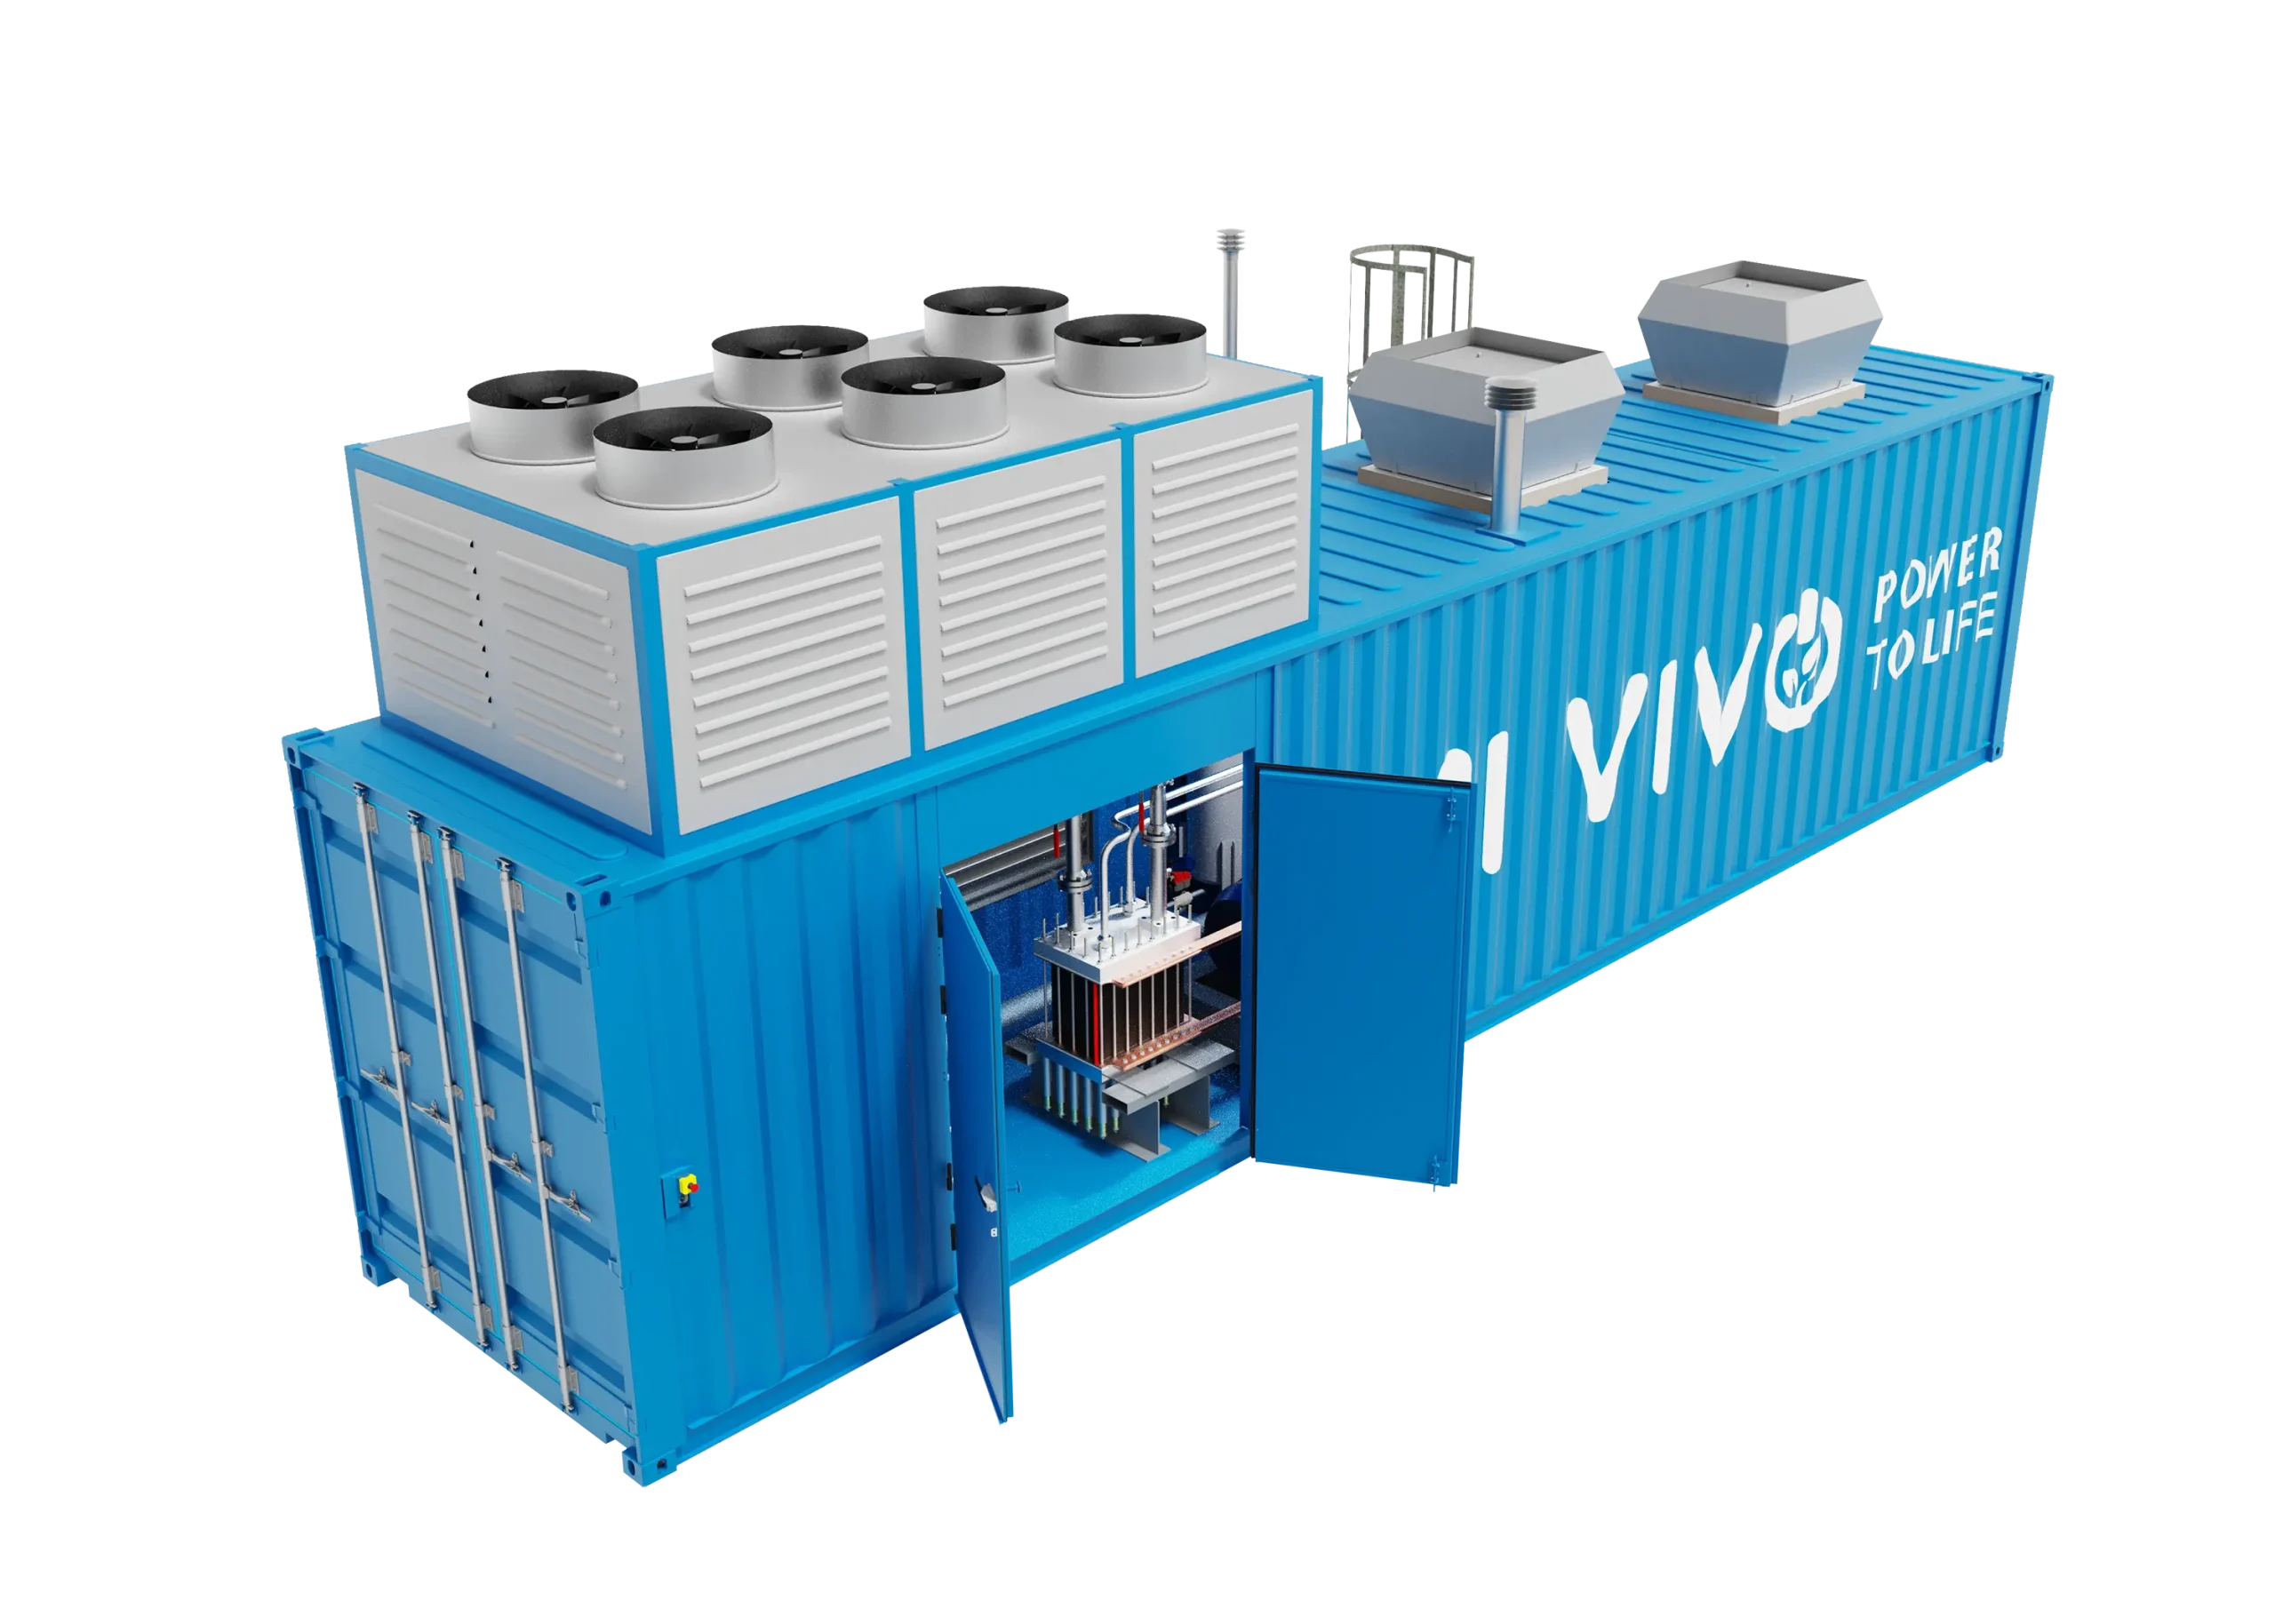 IMI VIVO Electrolyser produces green hydrogen with renewable electricity. It's a fully-integrated package with electrolyser, fuel cell, and storage.